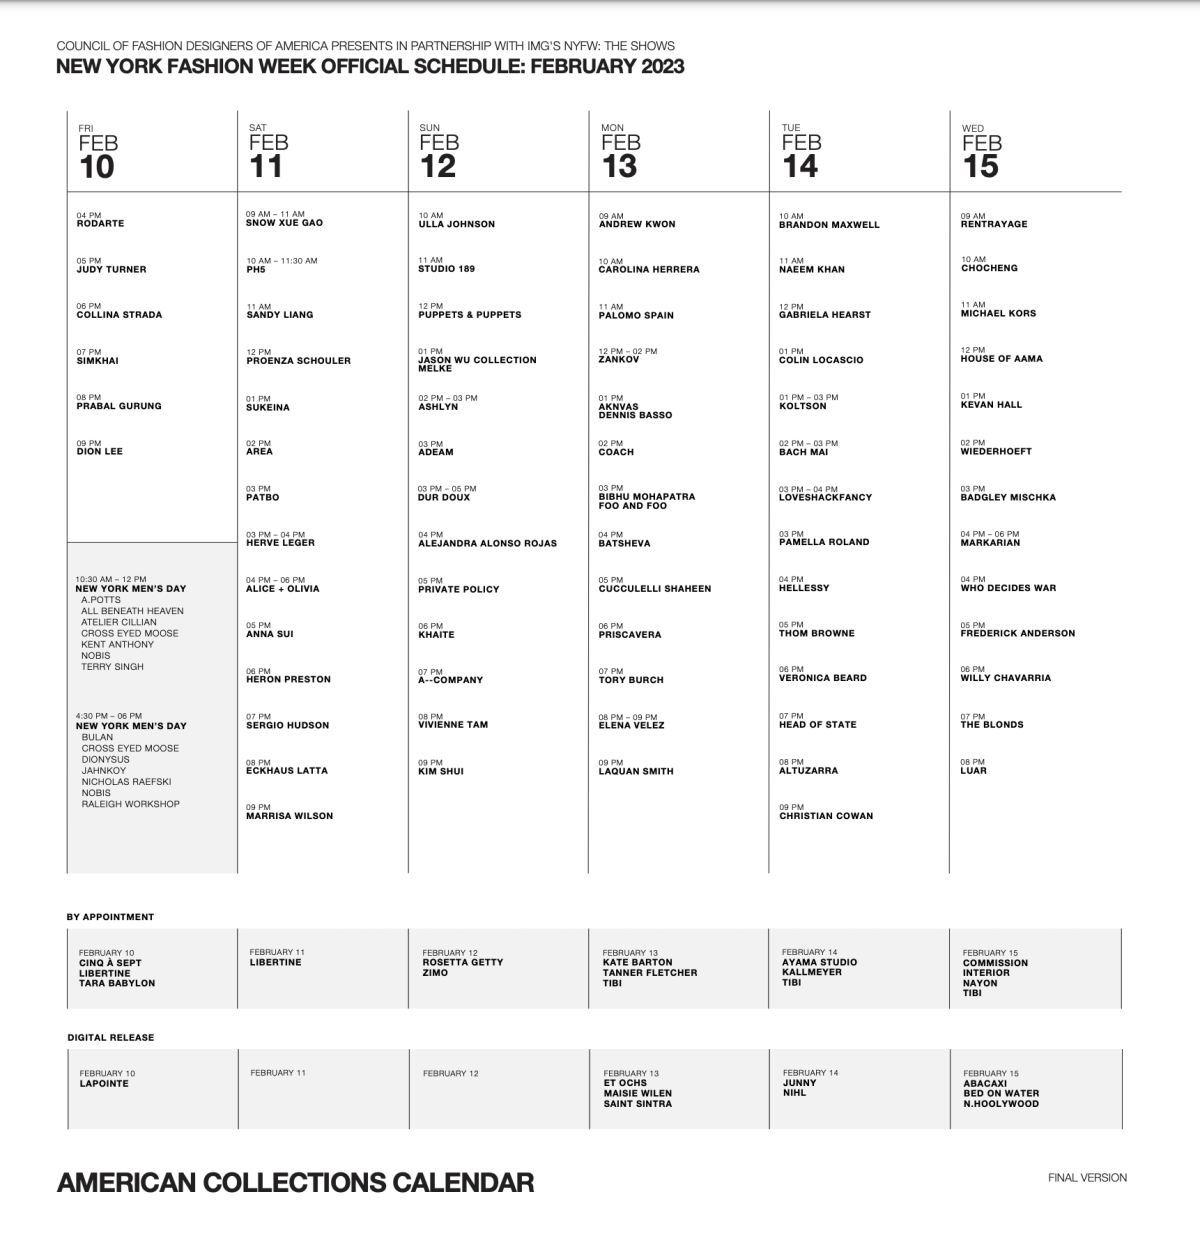 NEW YORK FASHION WEEK IS COMING! GET THE RUNWAY SCHEDULE | THE UNTITLED ...